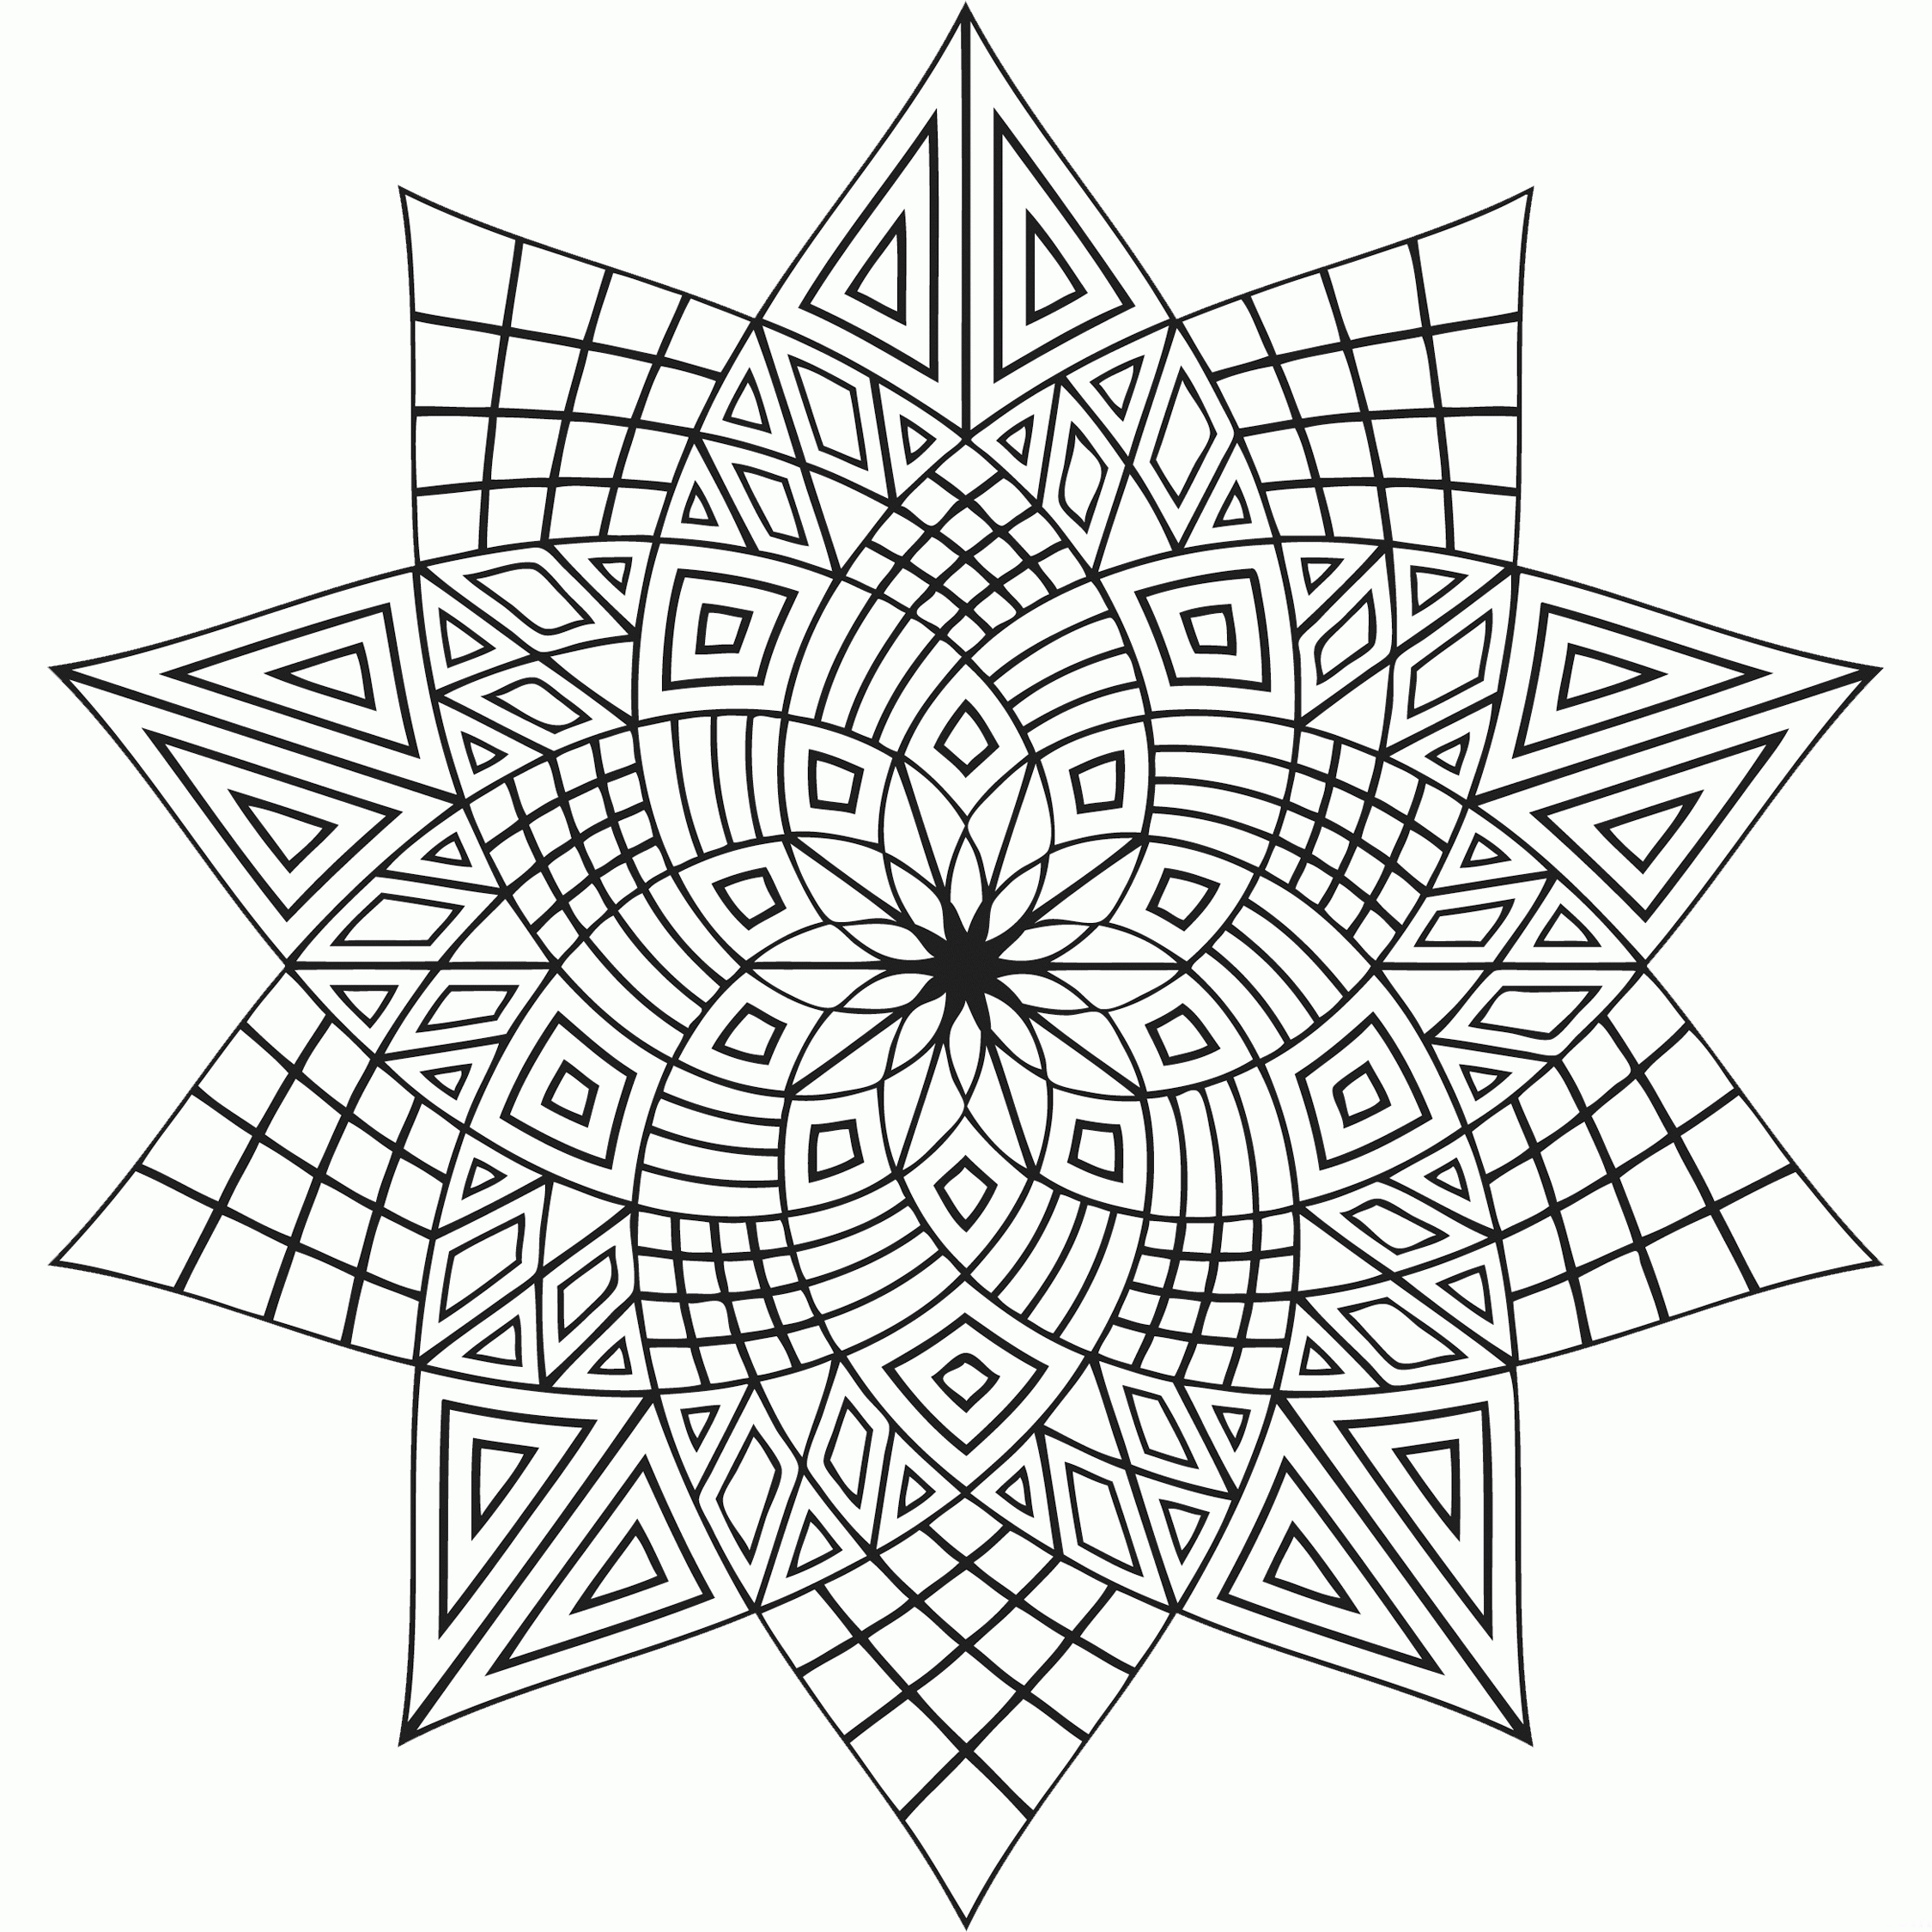 7 Best Images of Free Printable Adult Coloring Pages Advanced ...